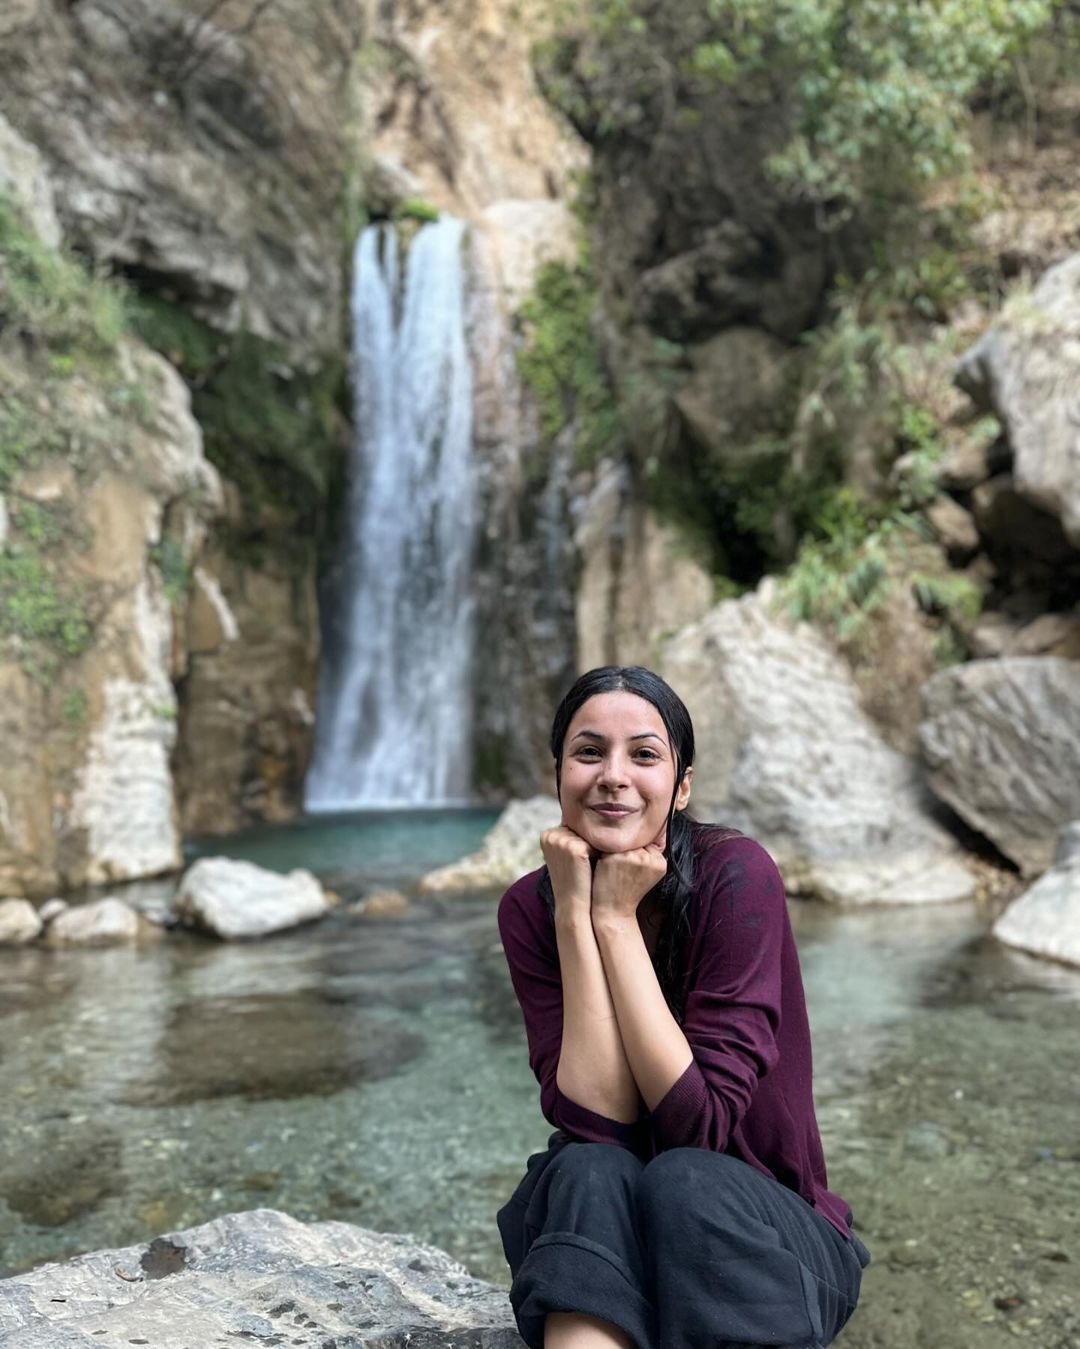 Bigg Boss 13 Fame Actress Shehnaaz Gill Forgets Herself While Enjoying The Beauty Of Nature!  See How She Seems So Happy In The Lush Surroundings And Cascading Water!